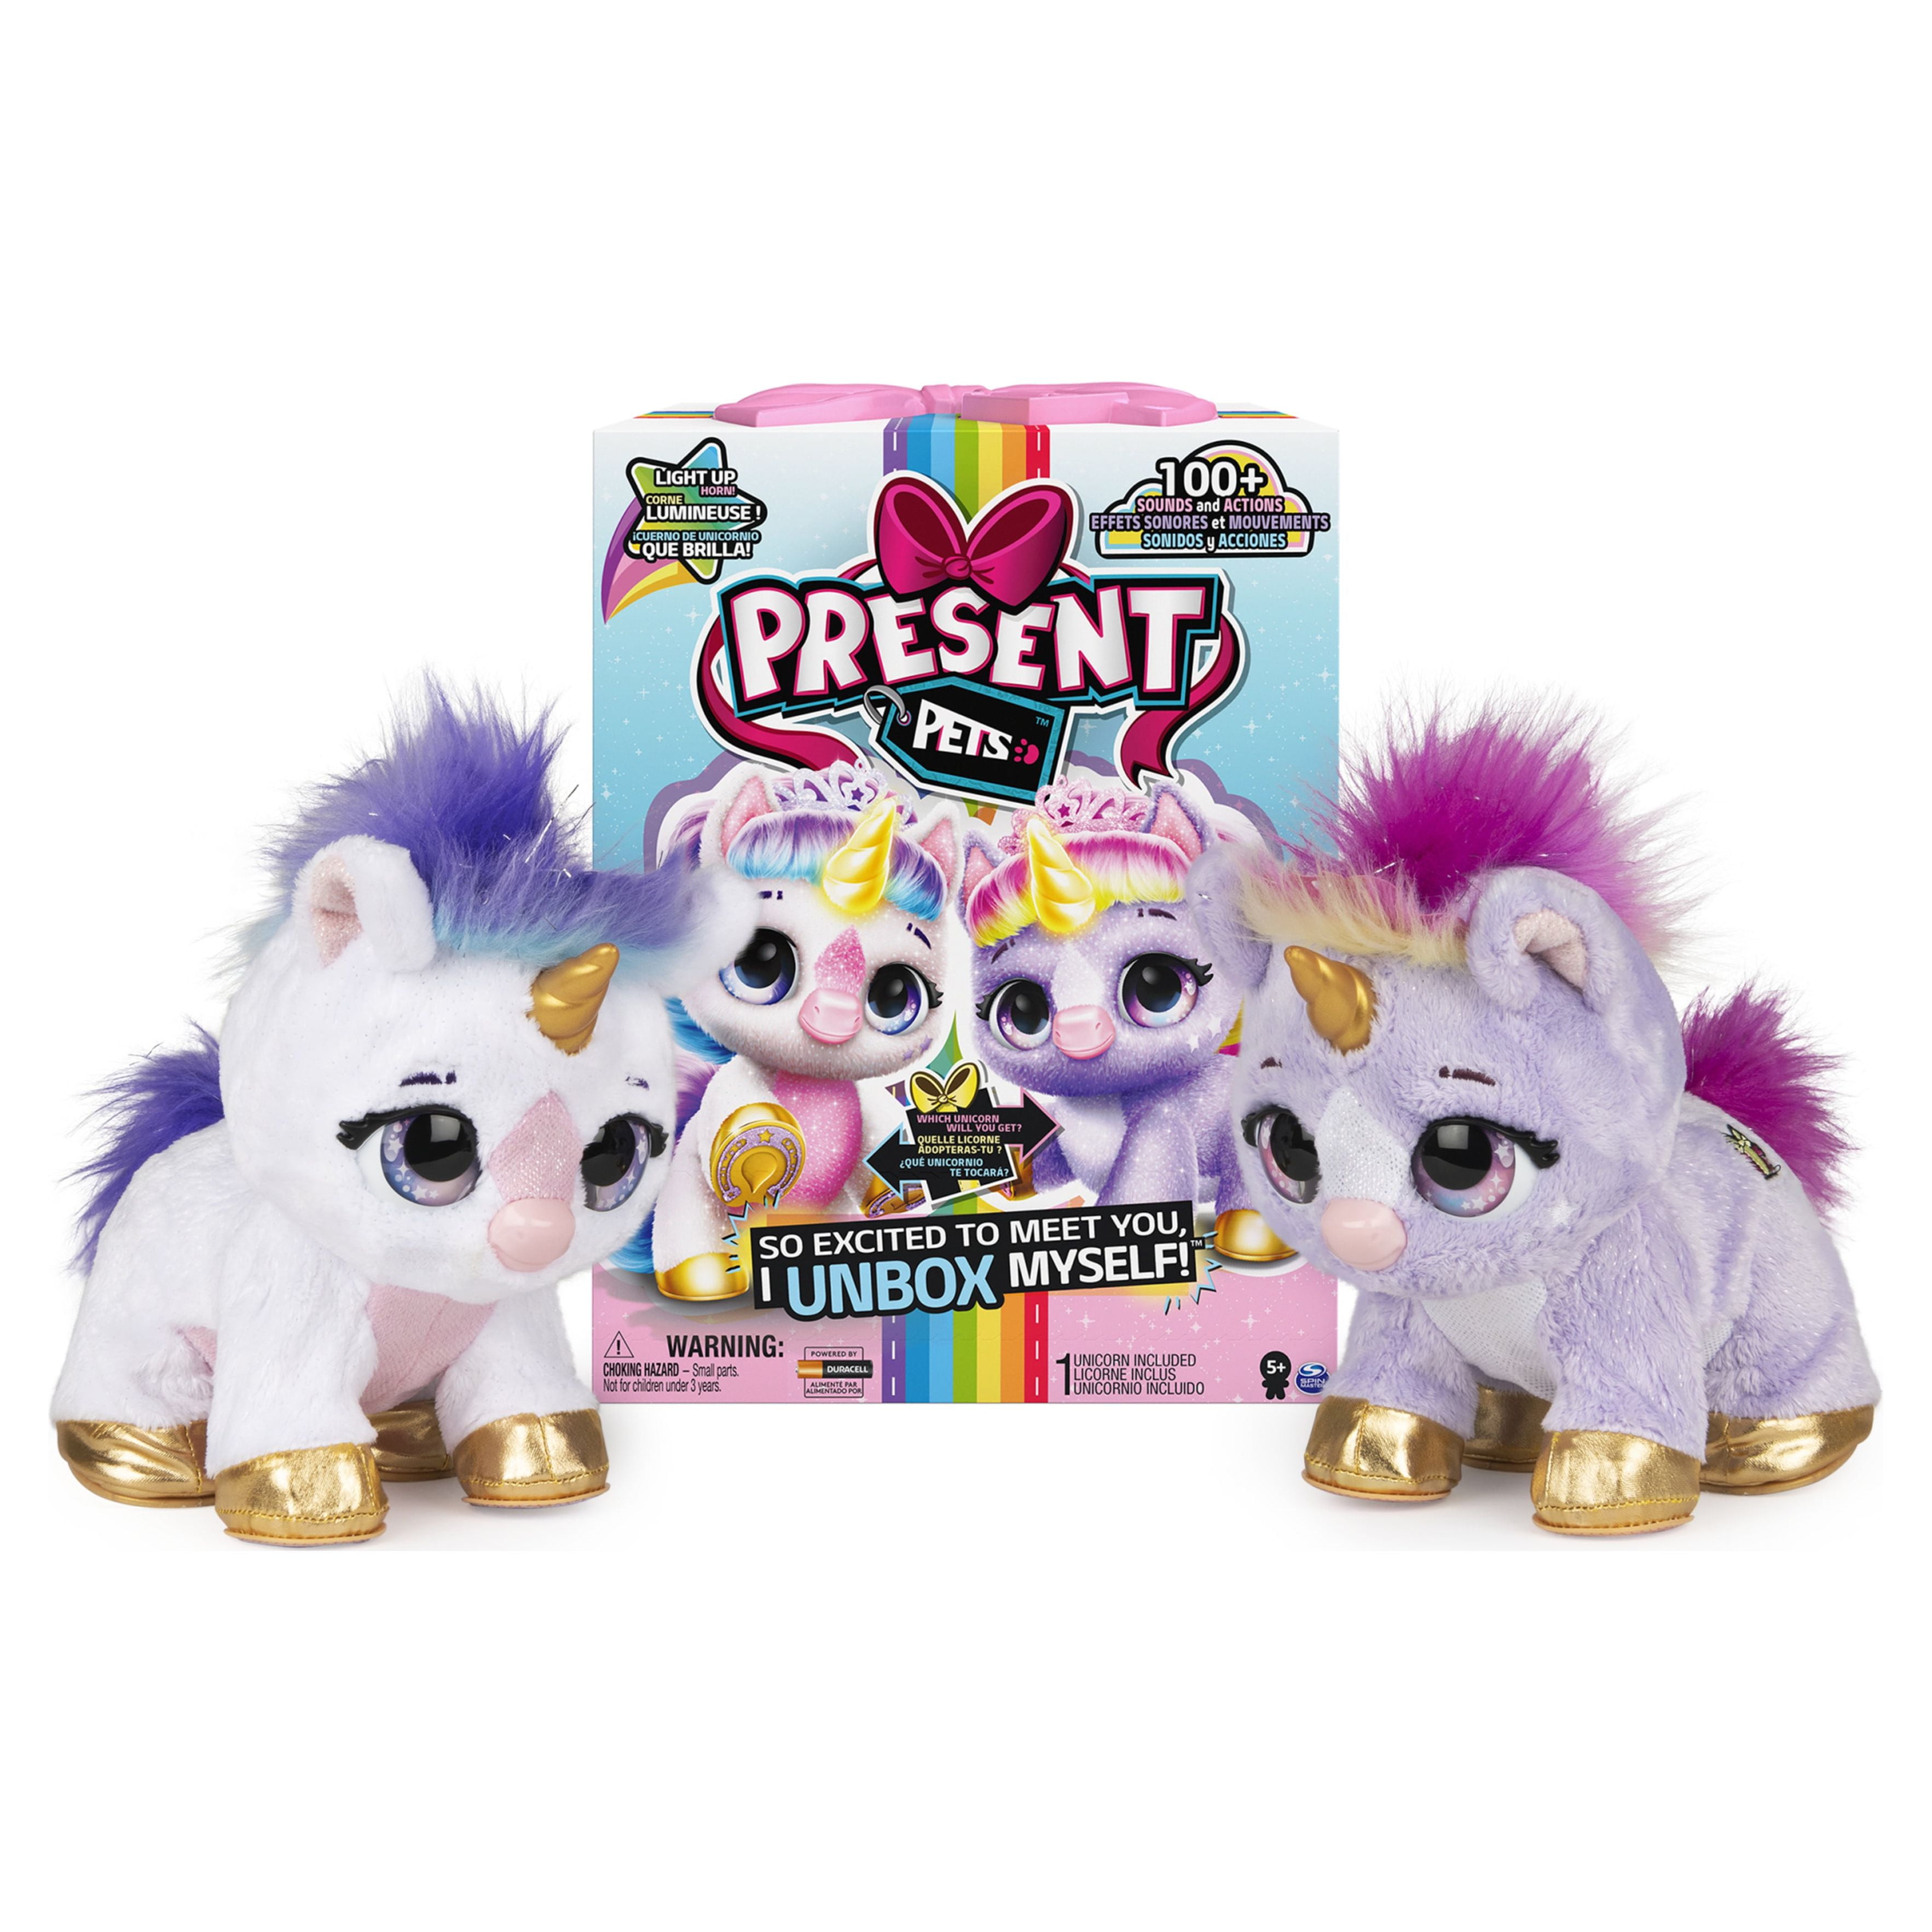 Present Pets, Glitter Puppy Interactive Plush Pet Toy with Over 100 Sounds  and Actions (Style May Vary) 